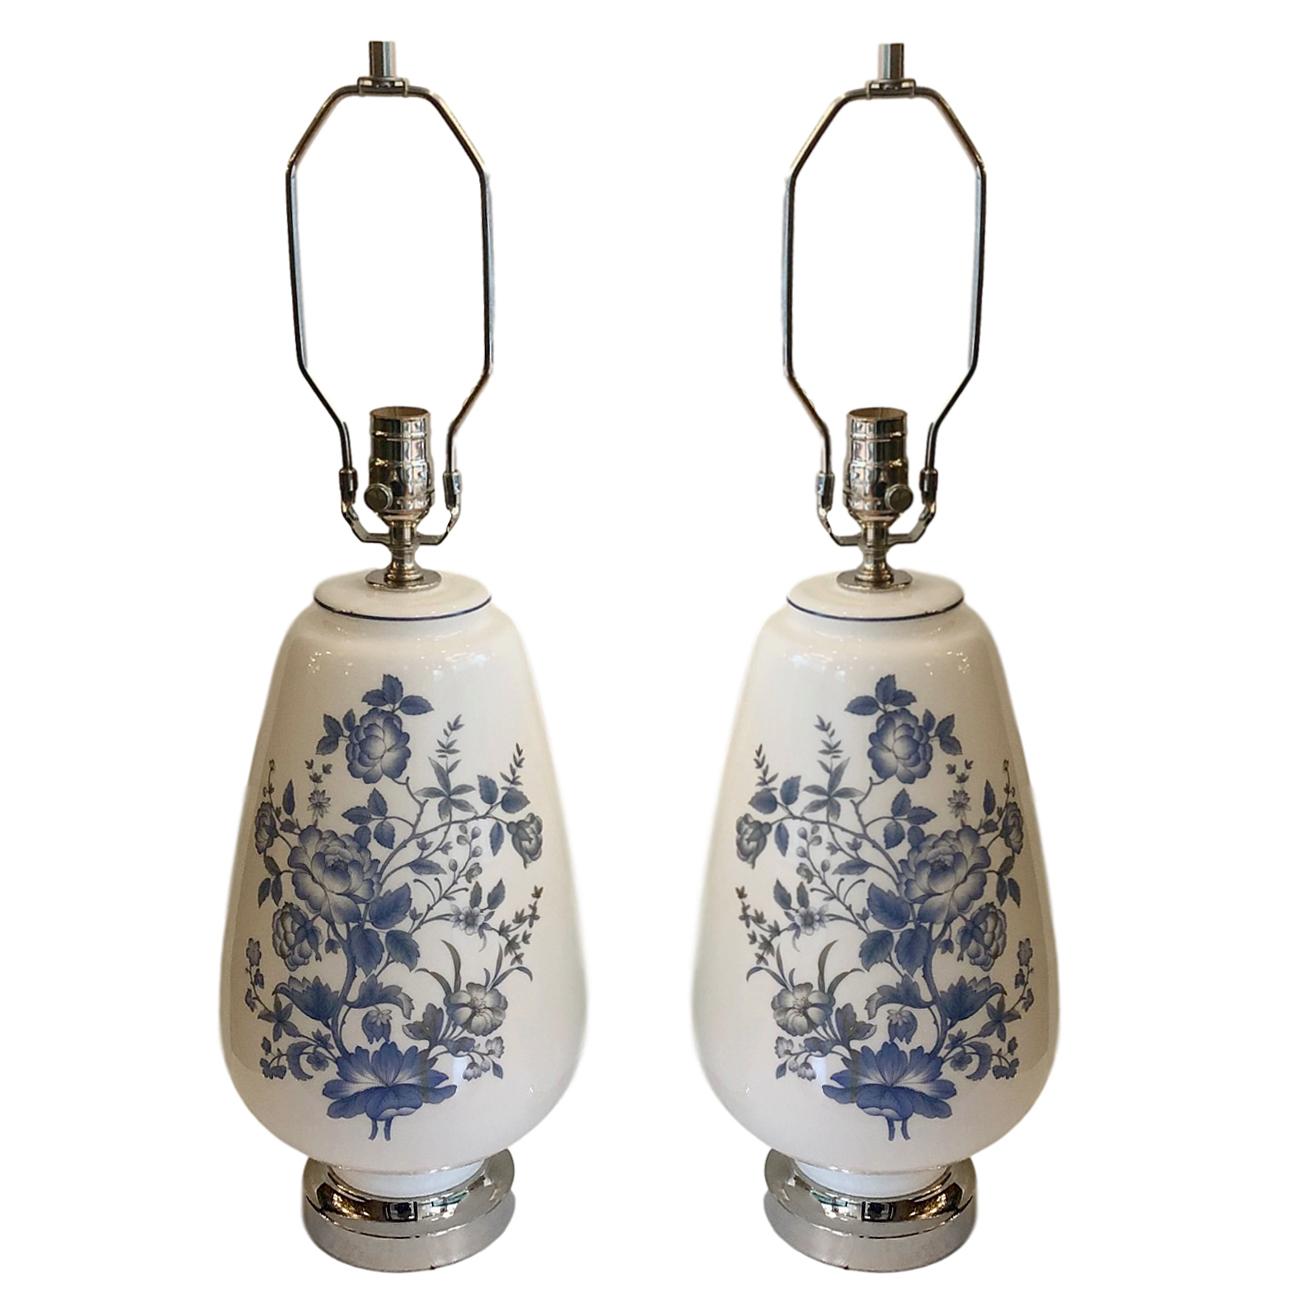 A pair of large circa 1940s French white opaline glass lamps with blue floral decoration.

Measurements:
Height of body: 17